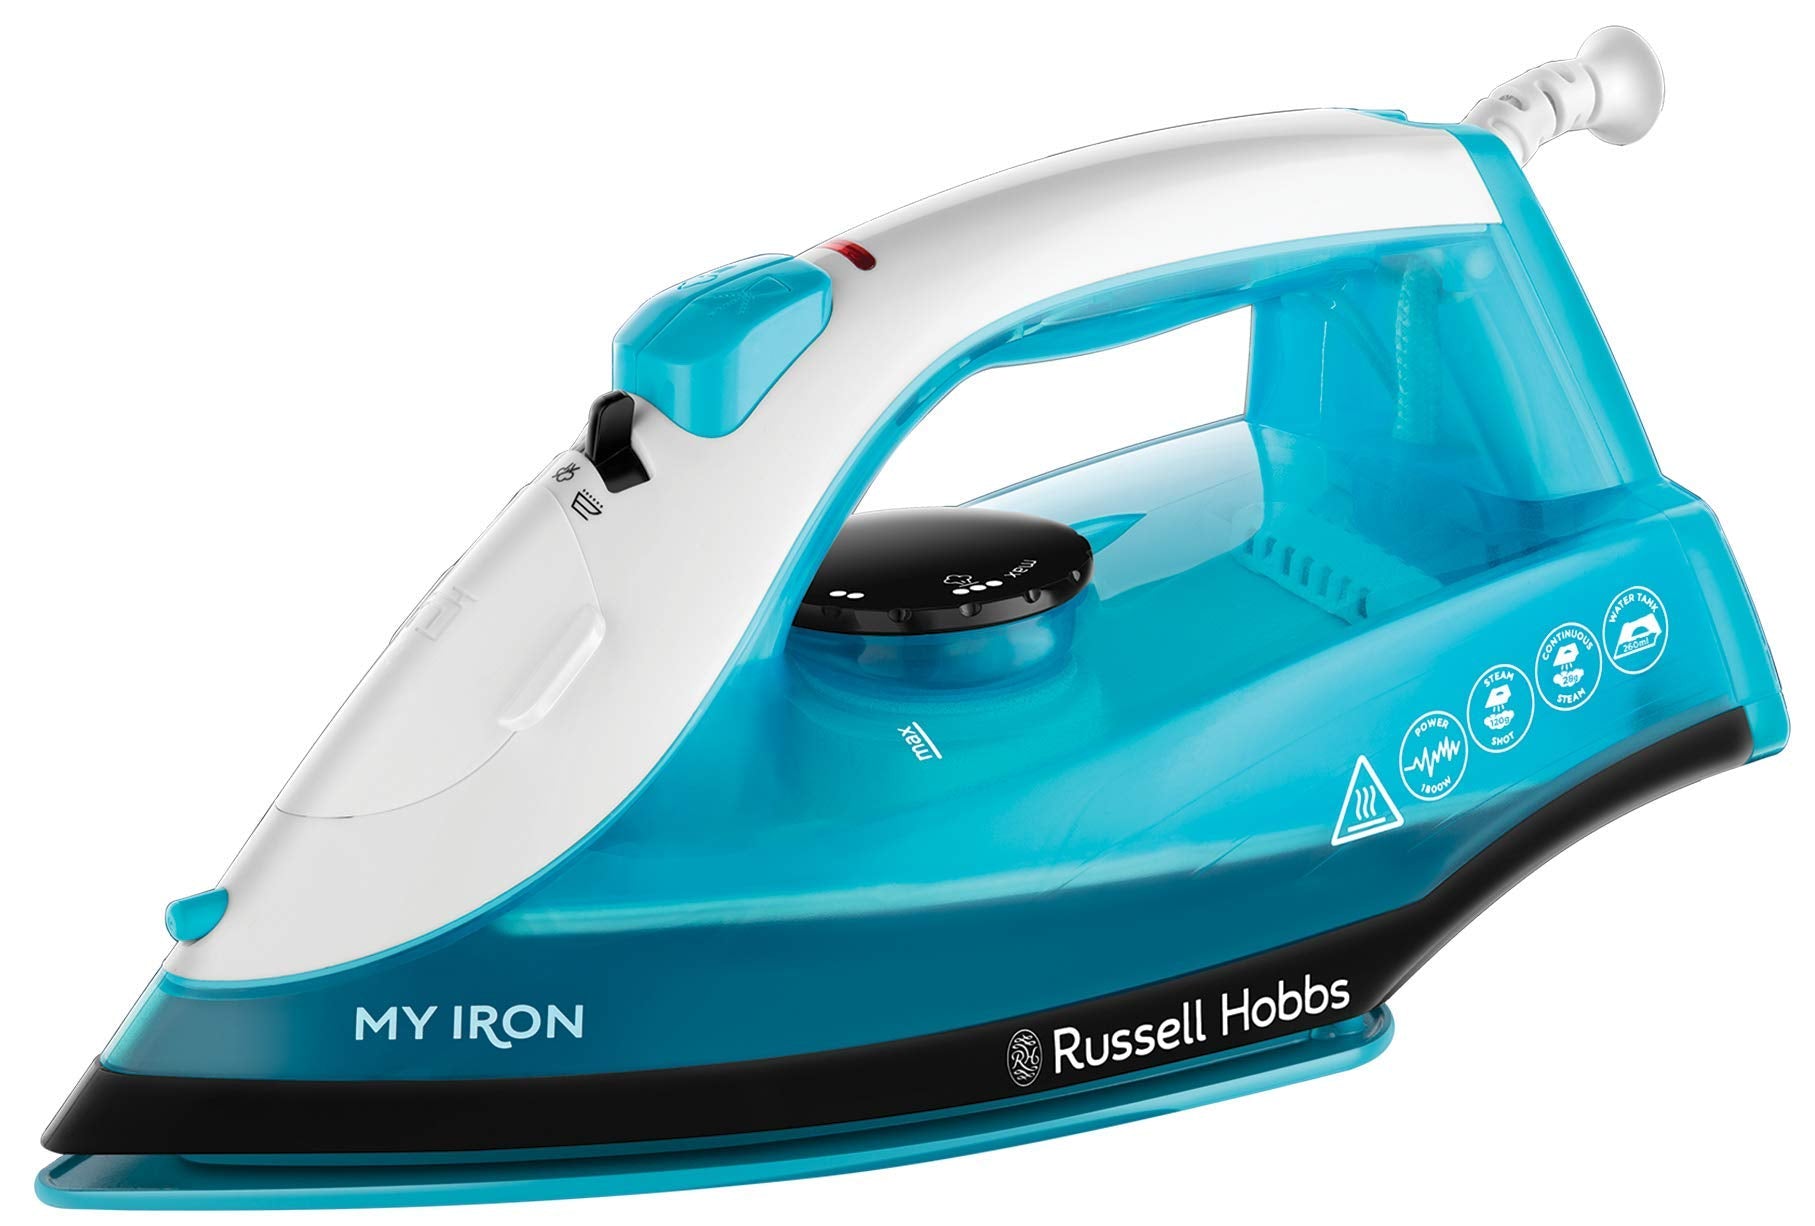 Russell Hobbs 1800W My Iron Steam Iron, Ceramic Soleplate, 260 ml Water Tank with 2m Power Cord, Self-Clean Function and Two Metre Power Cable, 25580 (Blue and White)